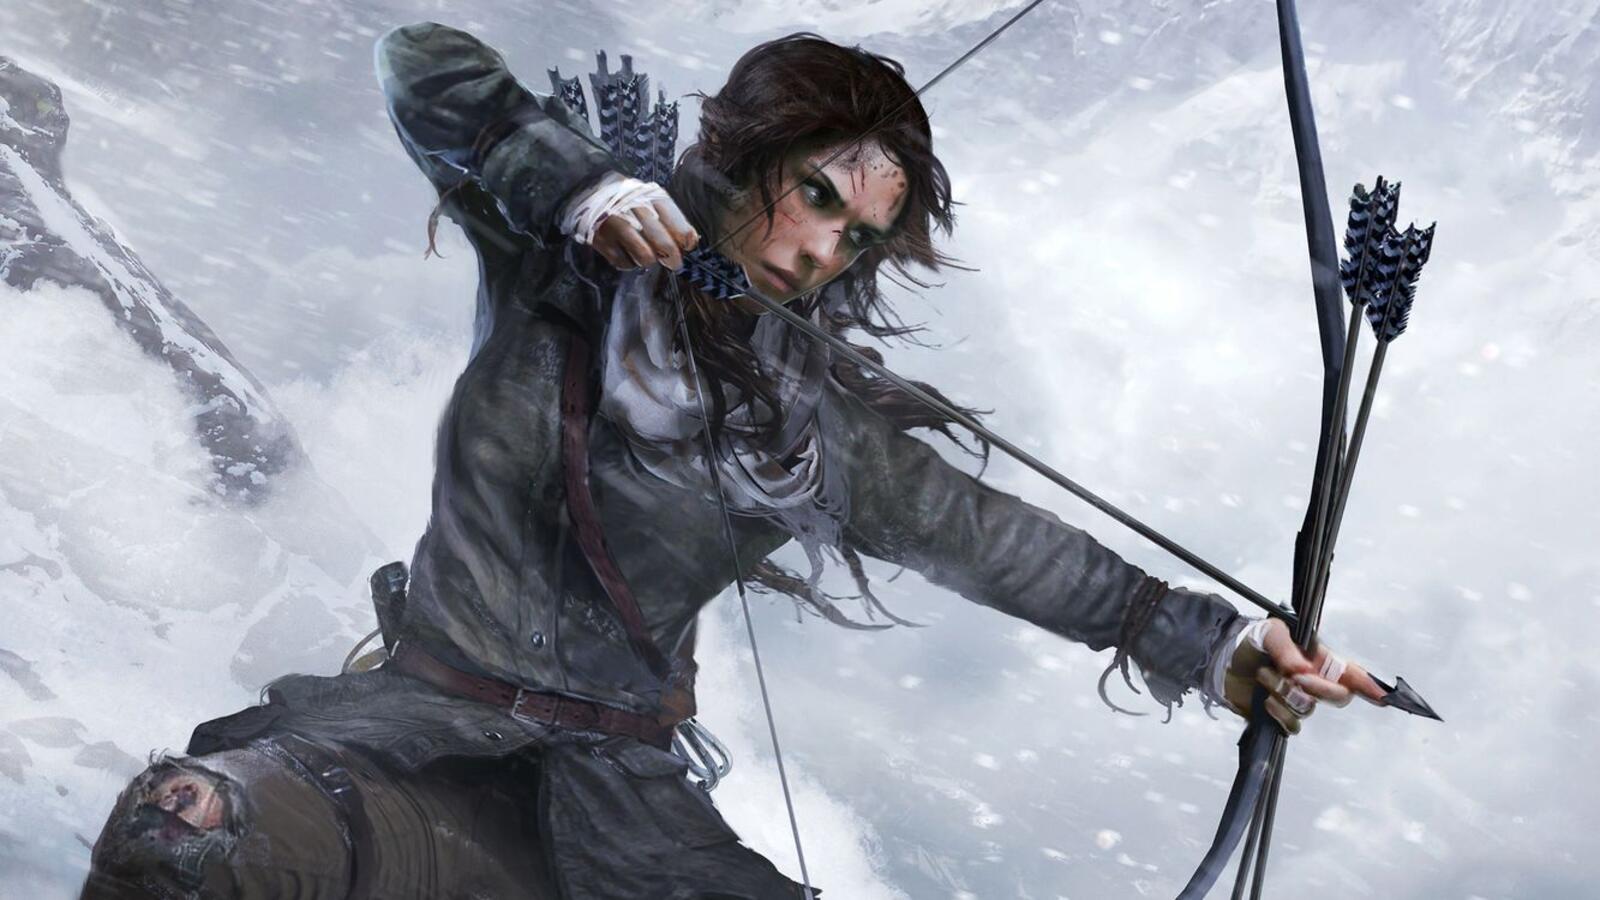 Wallpapers Lara Croft bow rise of the tomb rider on the desktop